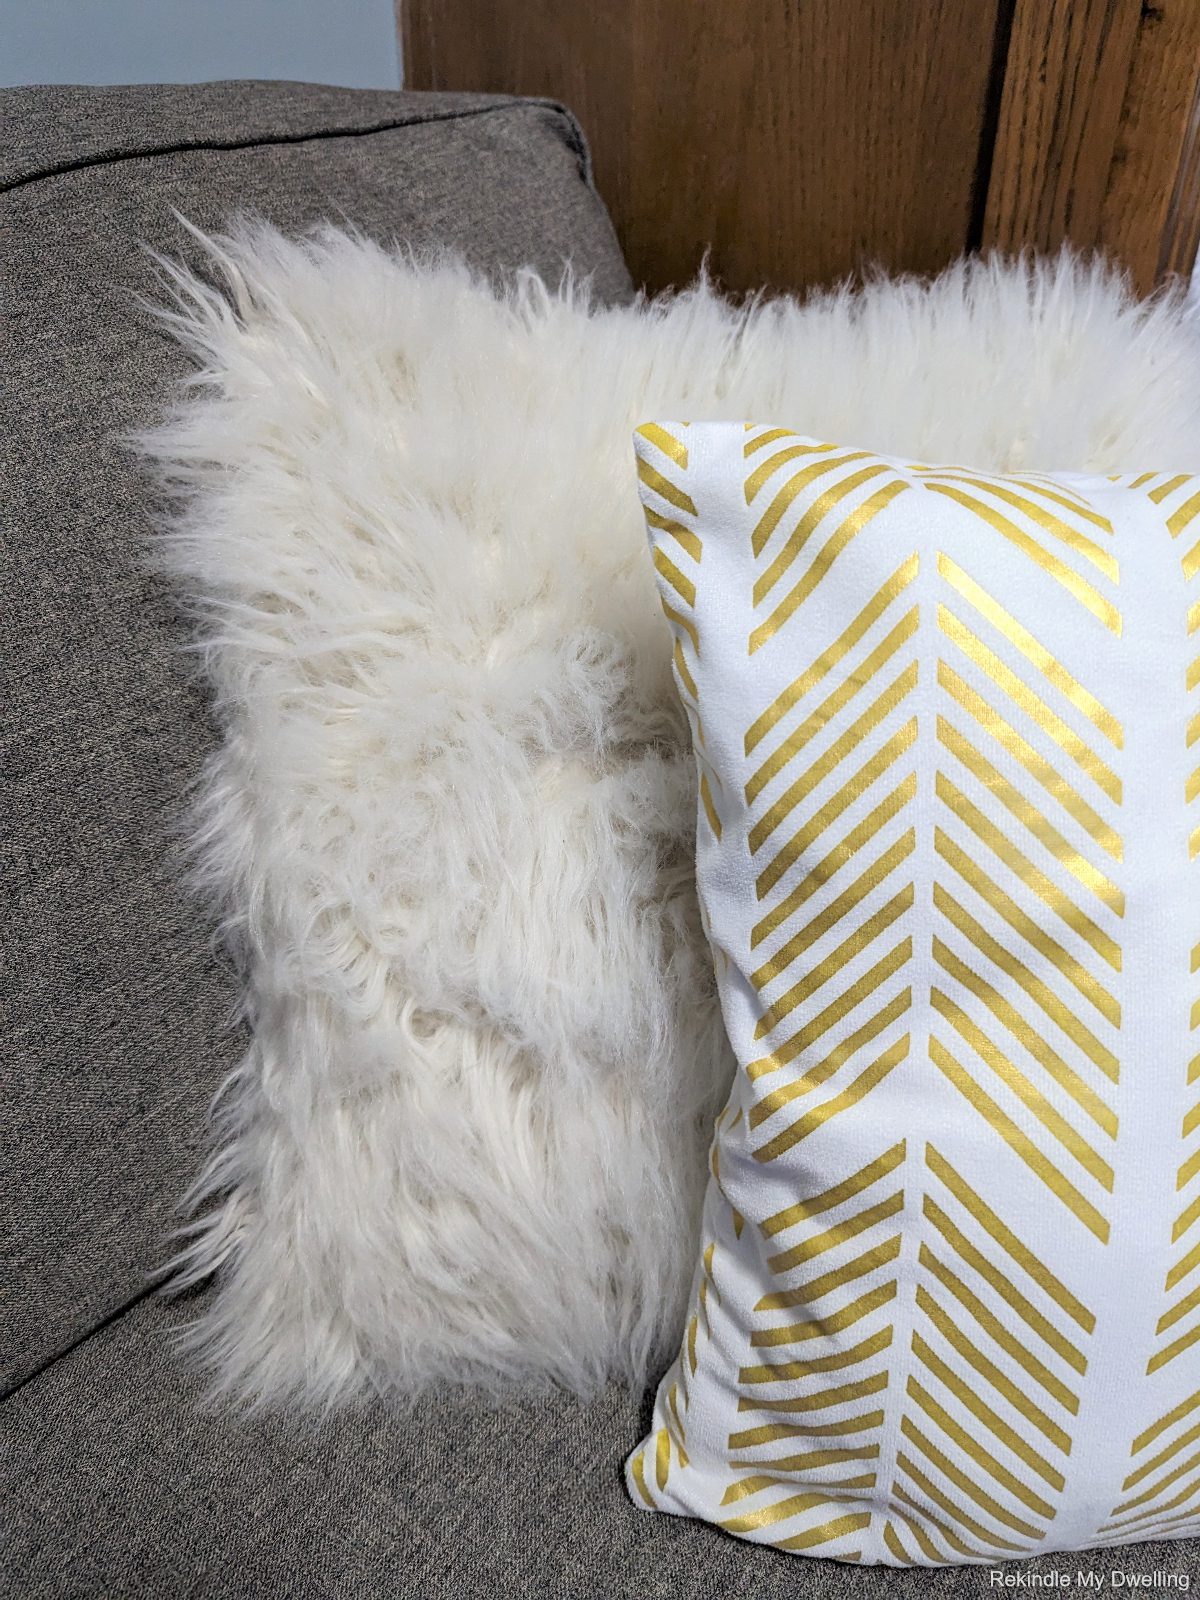 How to Keep Throw Pillows Fluffy- Even if You Have Kids, Pets & a Hubby